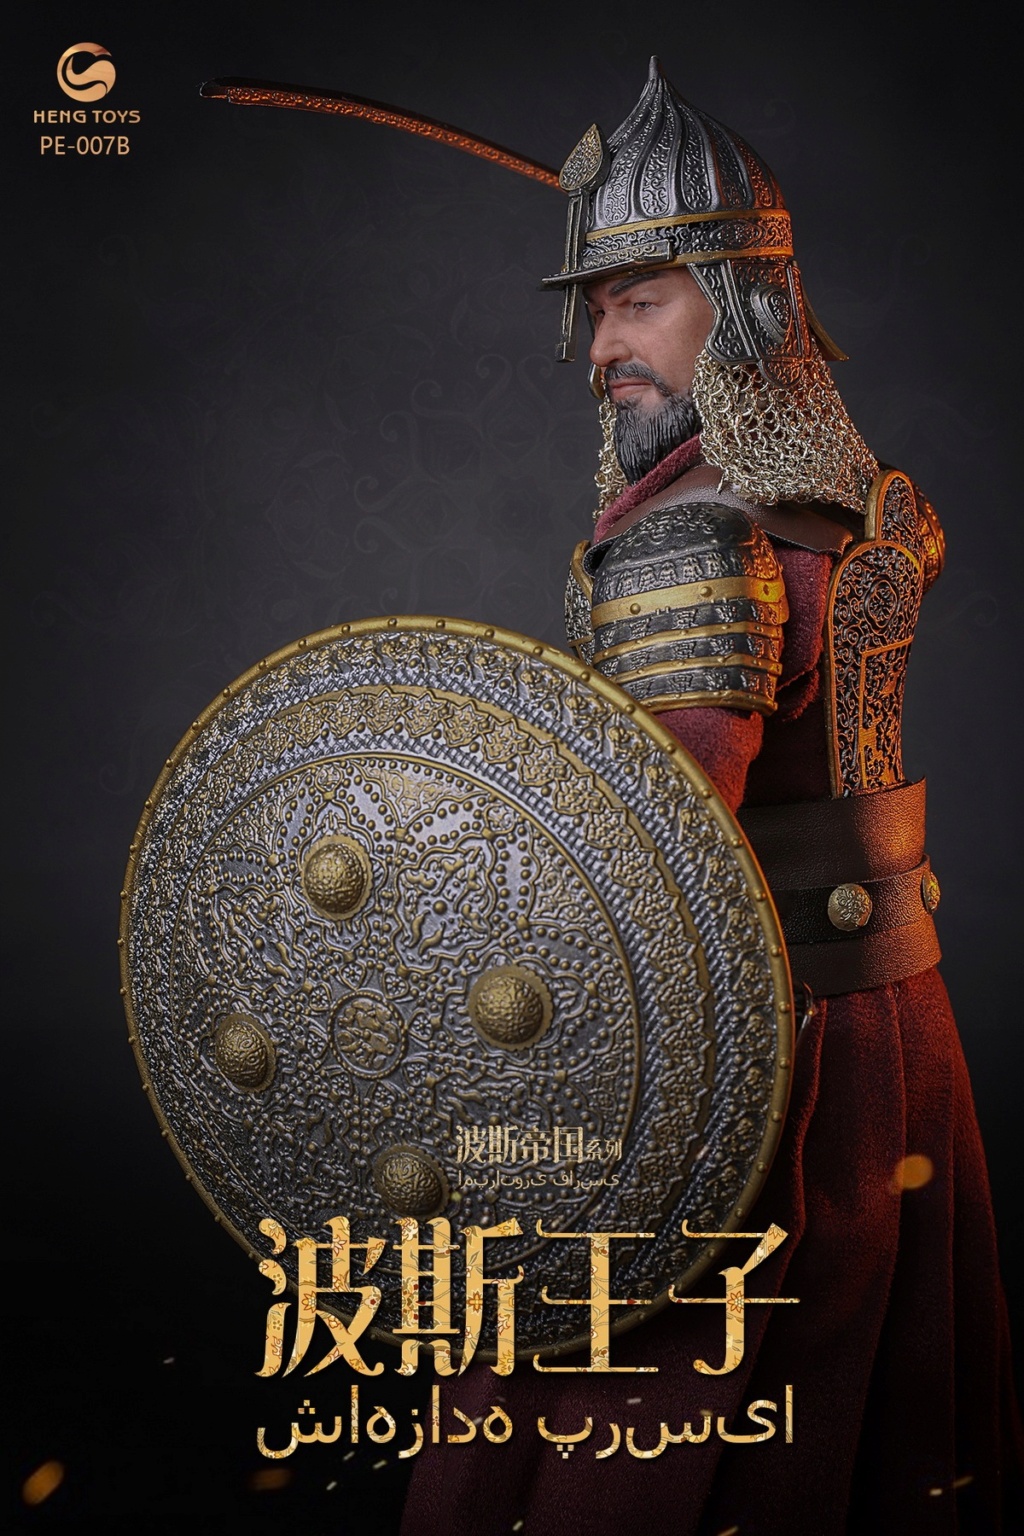 HengToys - NEW PRODUCT: HengToys: 1/6 Persian Empire Series-Prince of Persia [A & B Section] (#PE-007) 16040810